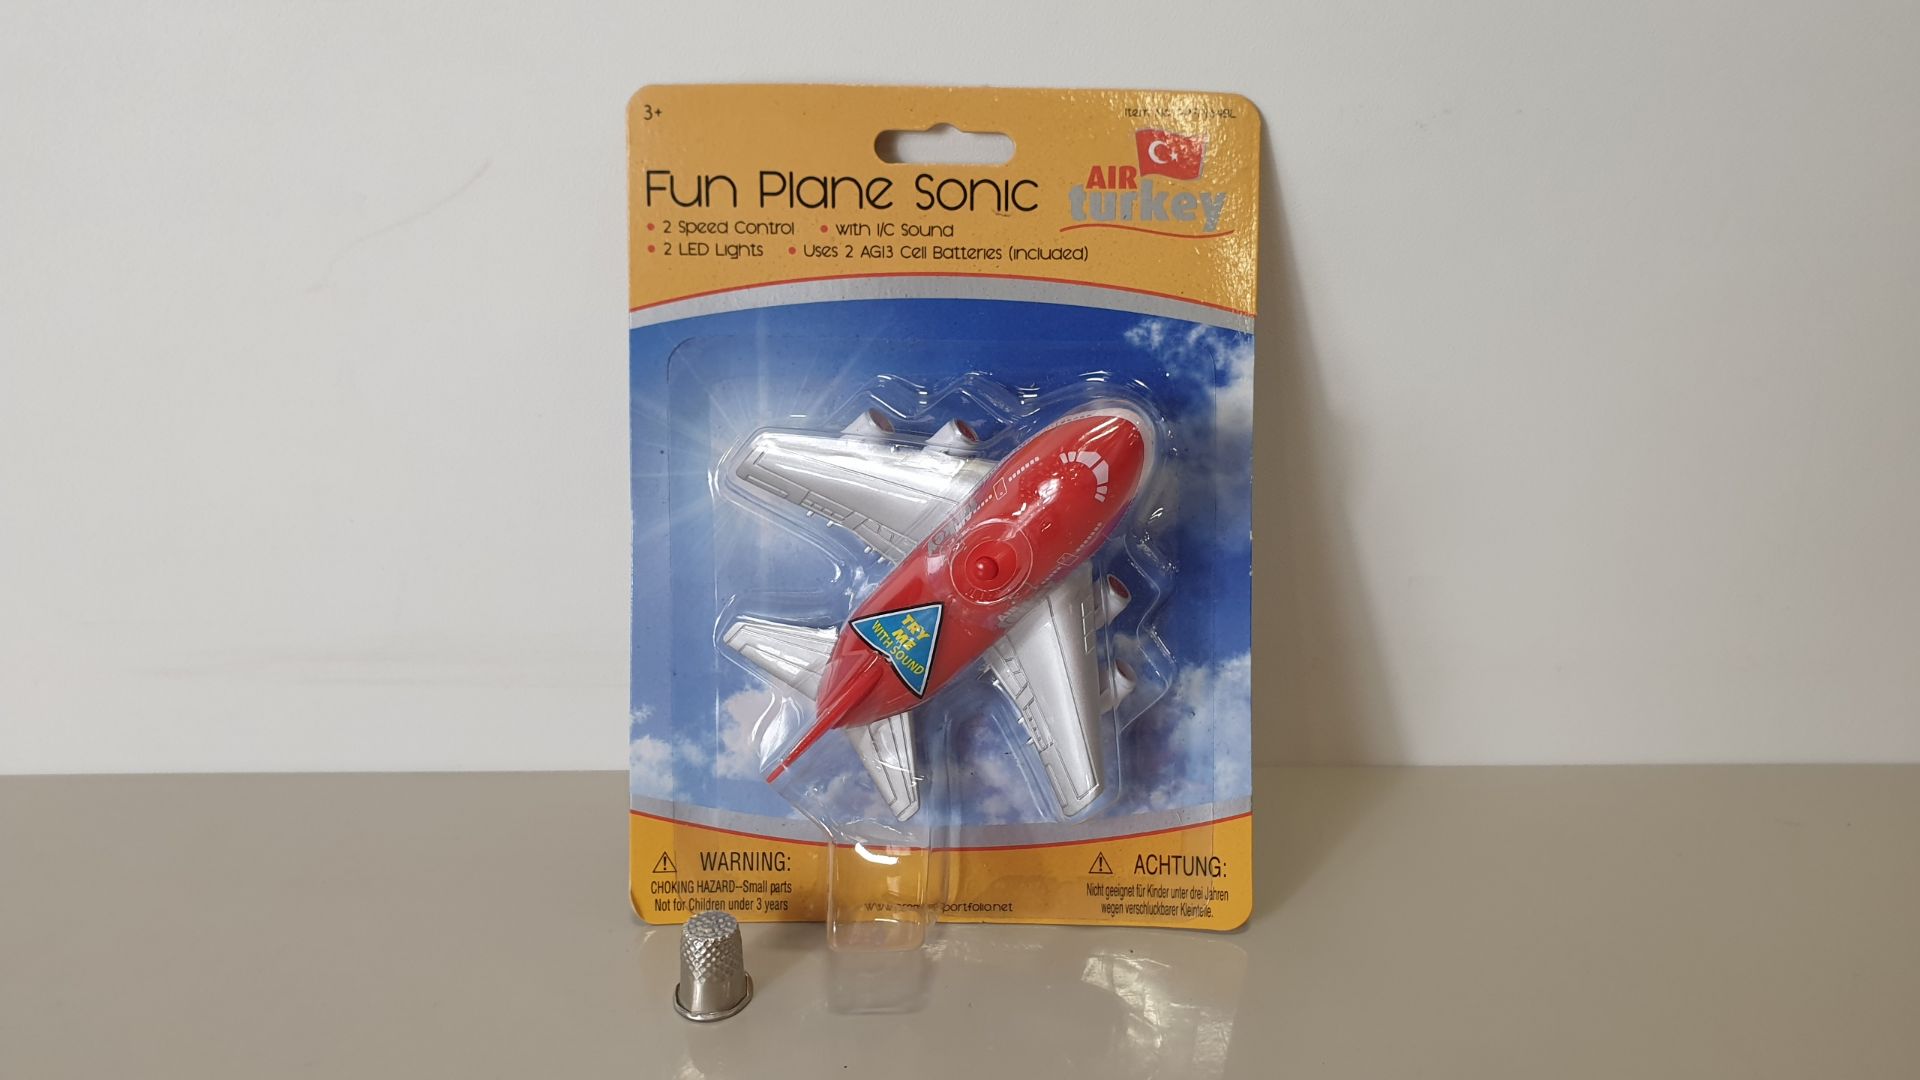 96 X SONIC FUN PLANE WITH LIGHTS & SOUND - AIRTURKEY - BATTERIES INCLUDED - (PPFP164BL) - ORIG